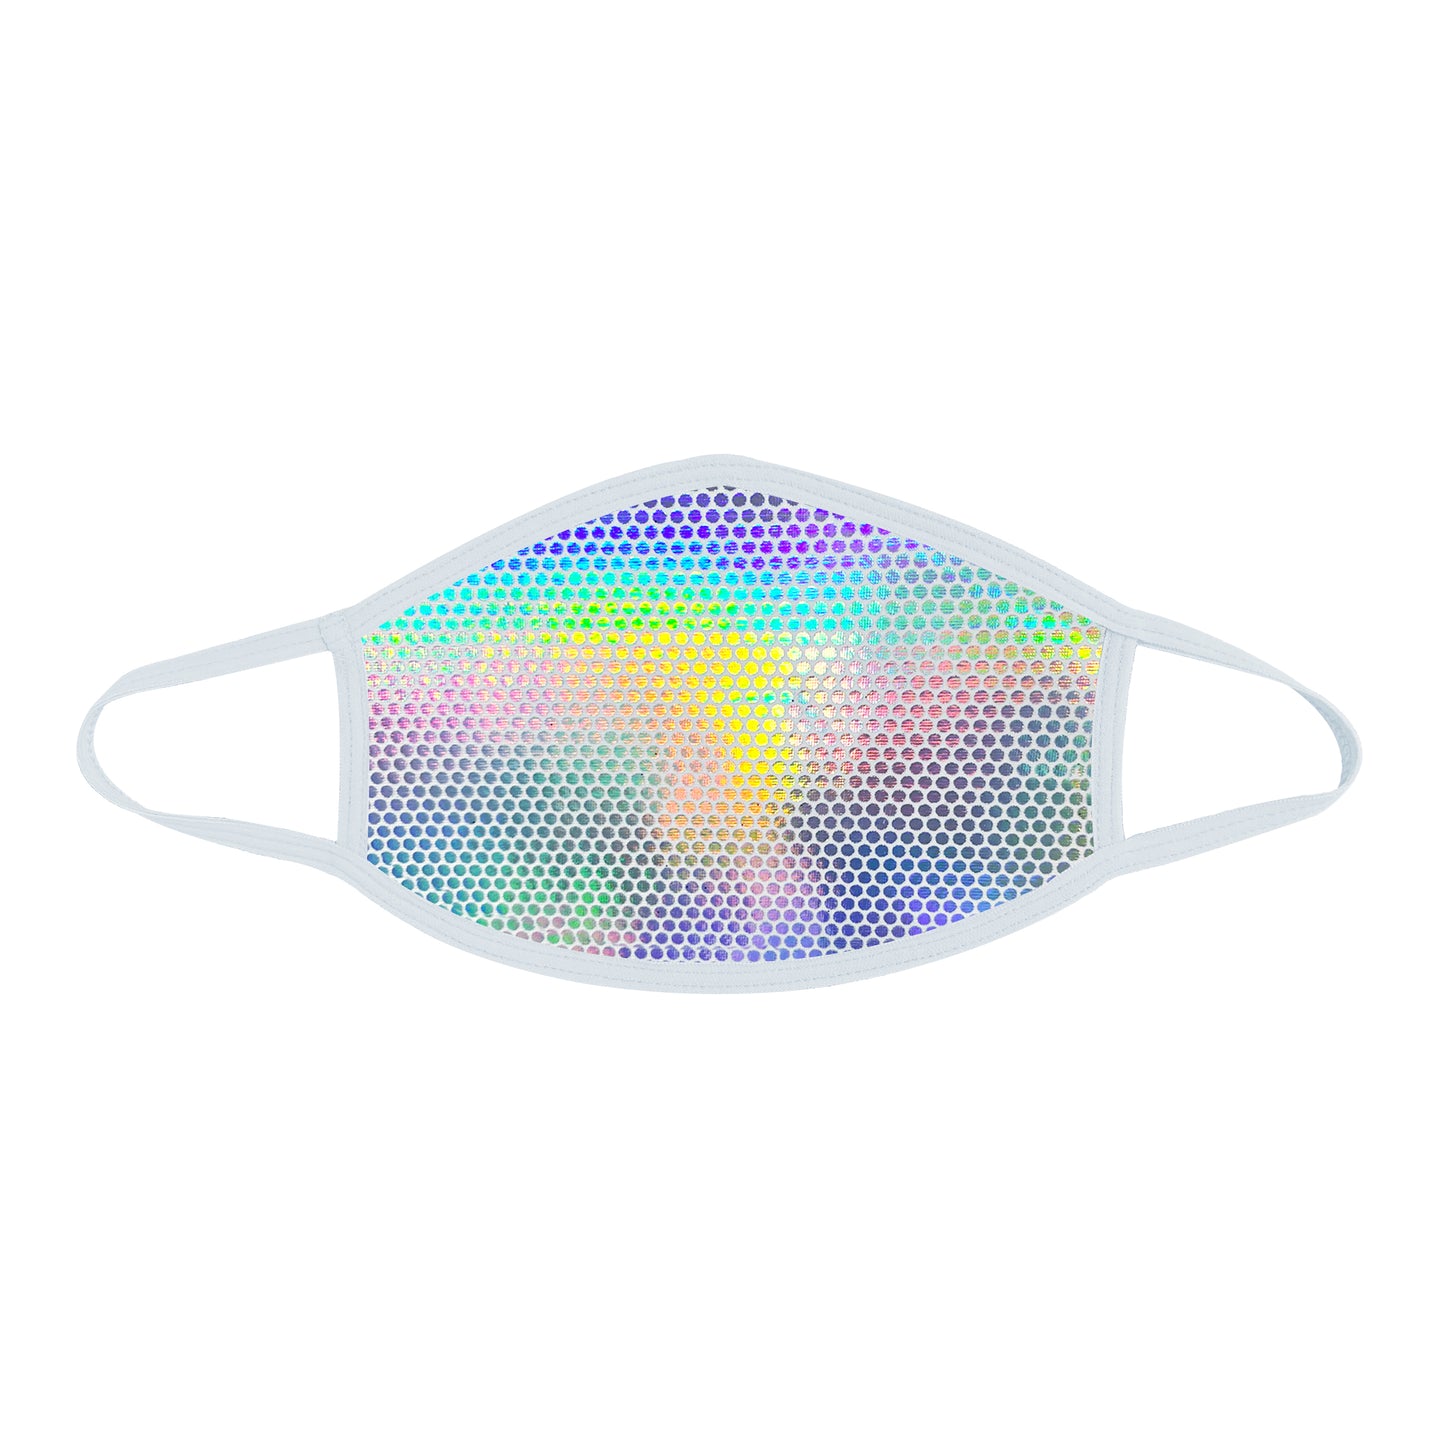 Neva Nude Liquid Party Pure Holographic White Dust Mask w/ Silver Trim